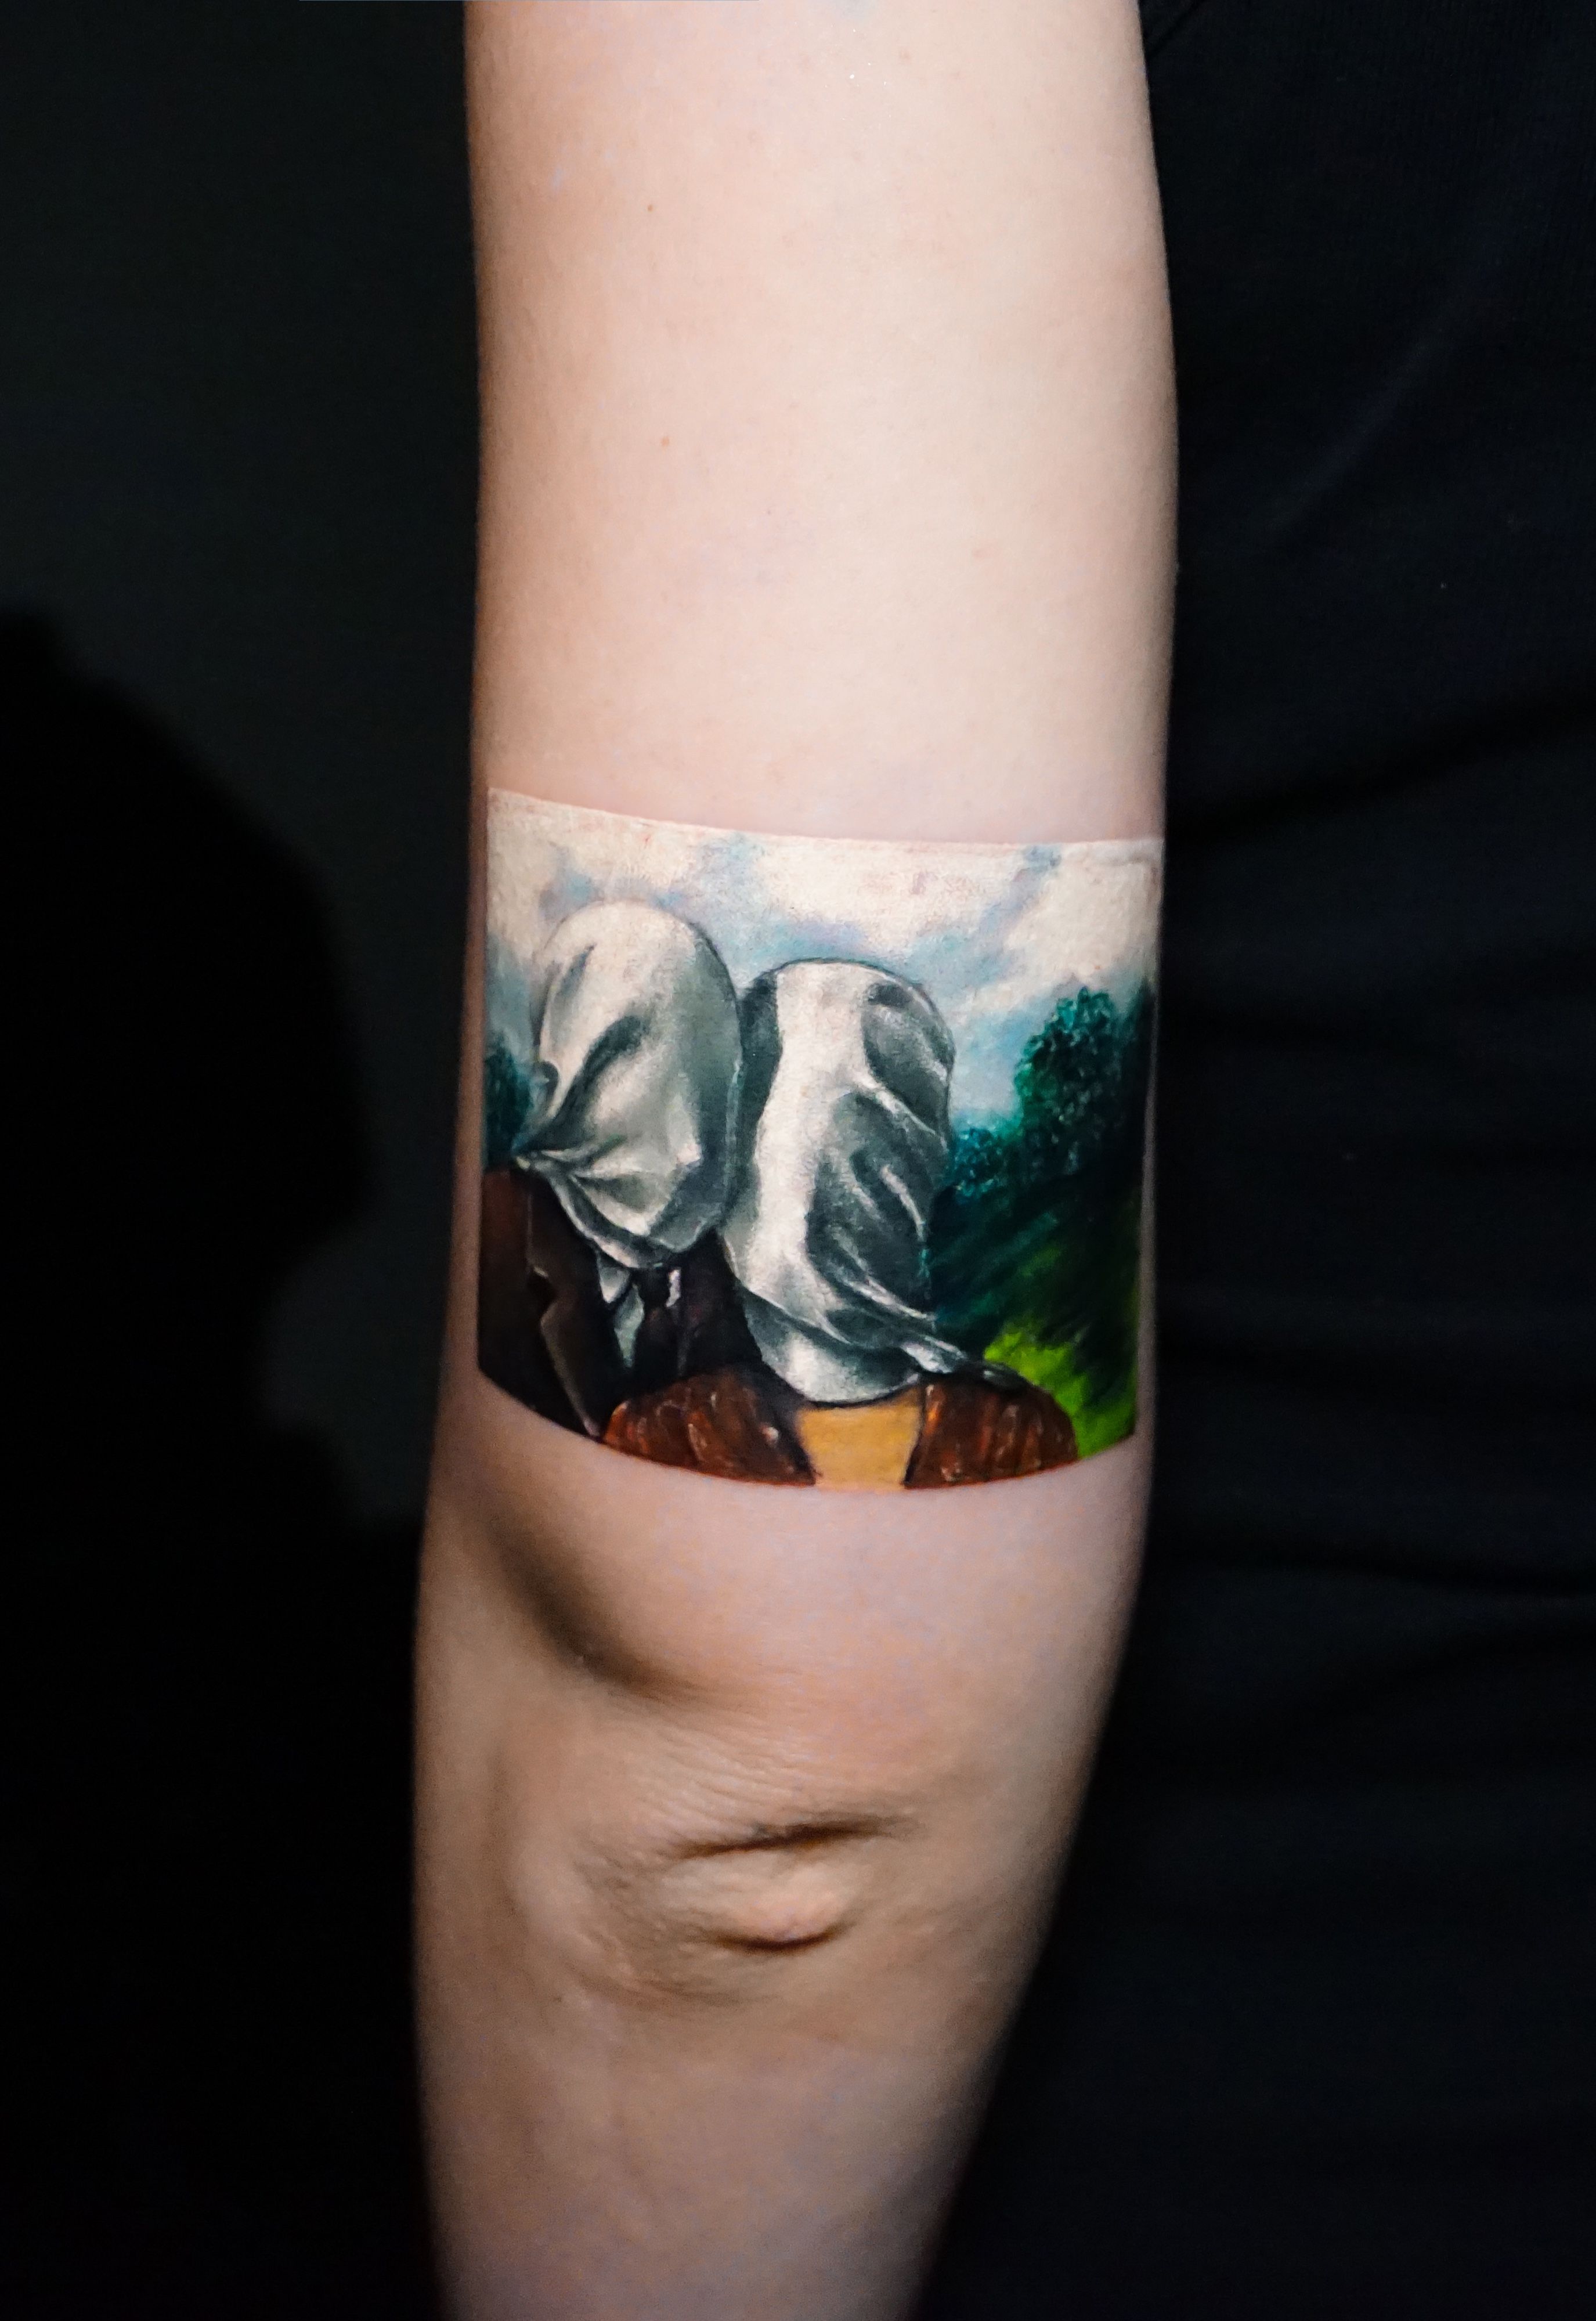 René Magritte  Los amantes tattoo by Andrea Morales  Photo 27166